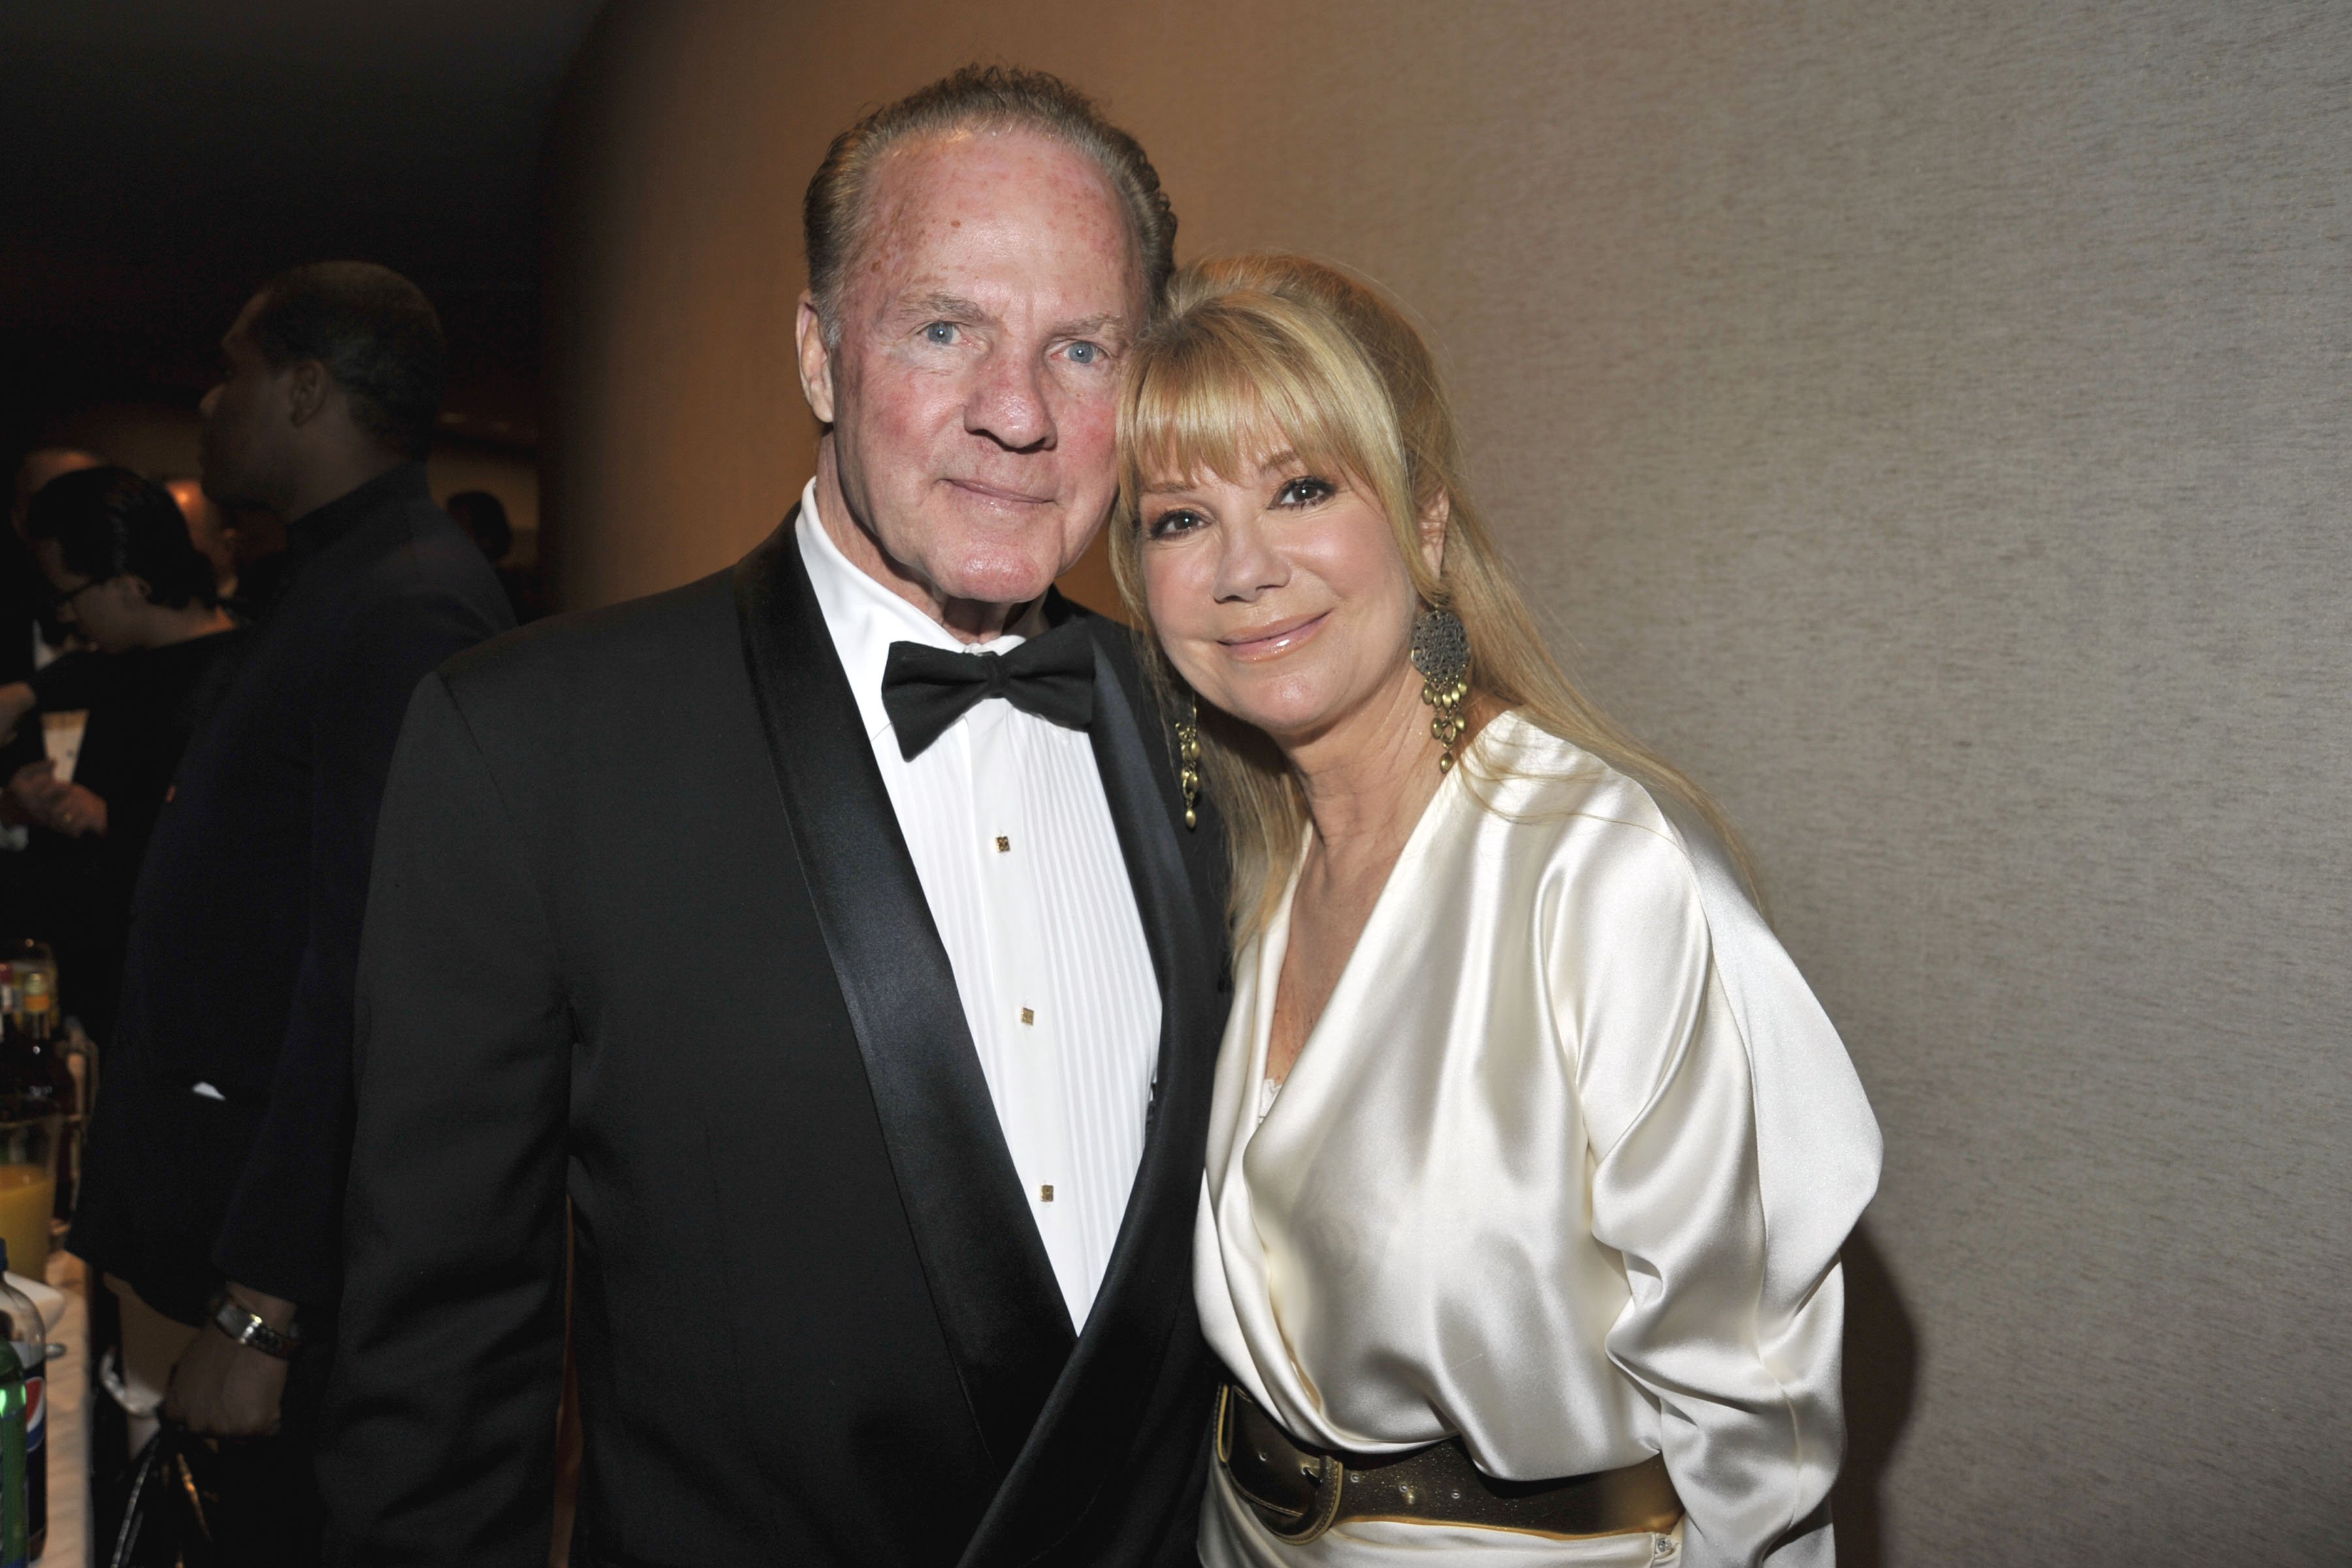 Frank Gifford and Kathie Lee Gifford at the Literacy Partners Evening of Readings Gala at David H. Koch Theater, 2010, New York City. | Photo: Getty Images